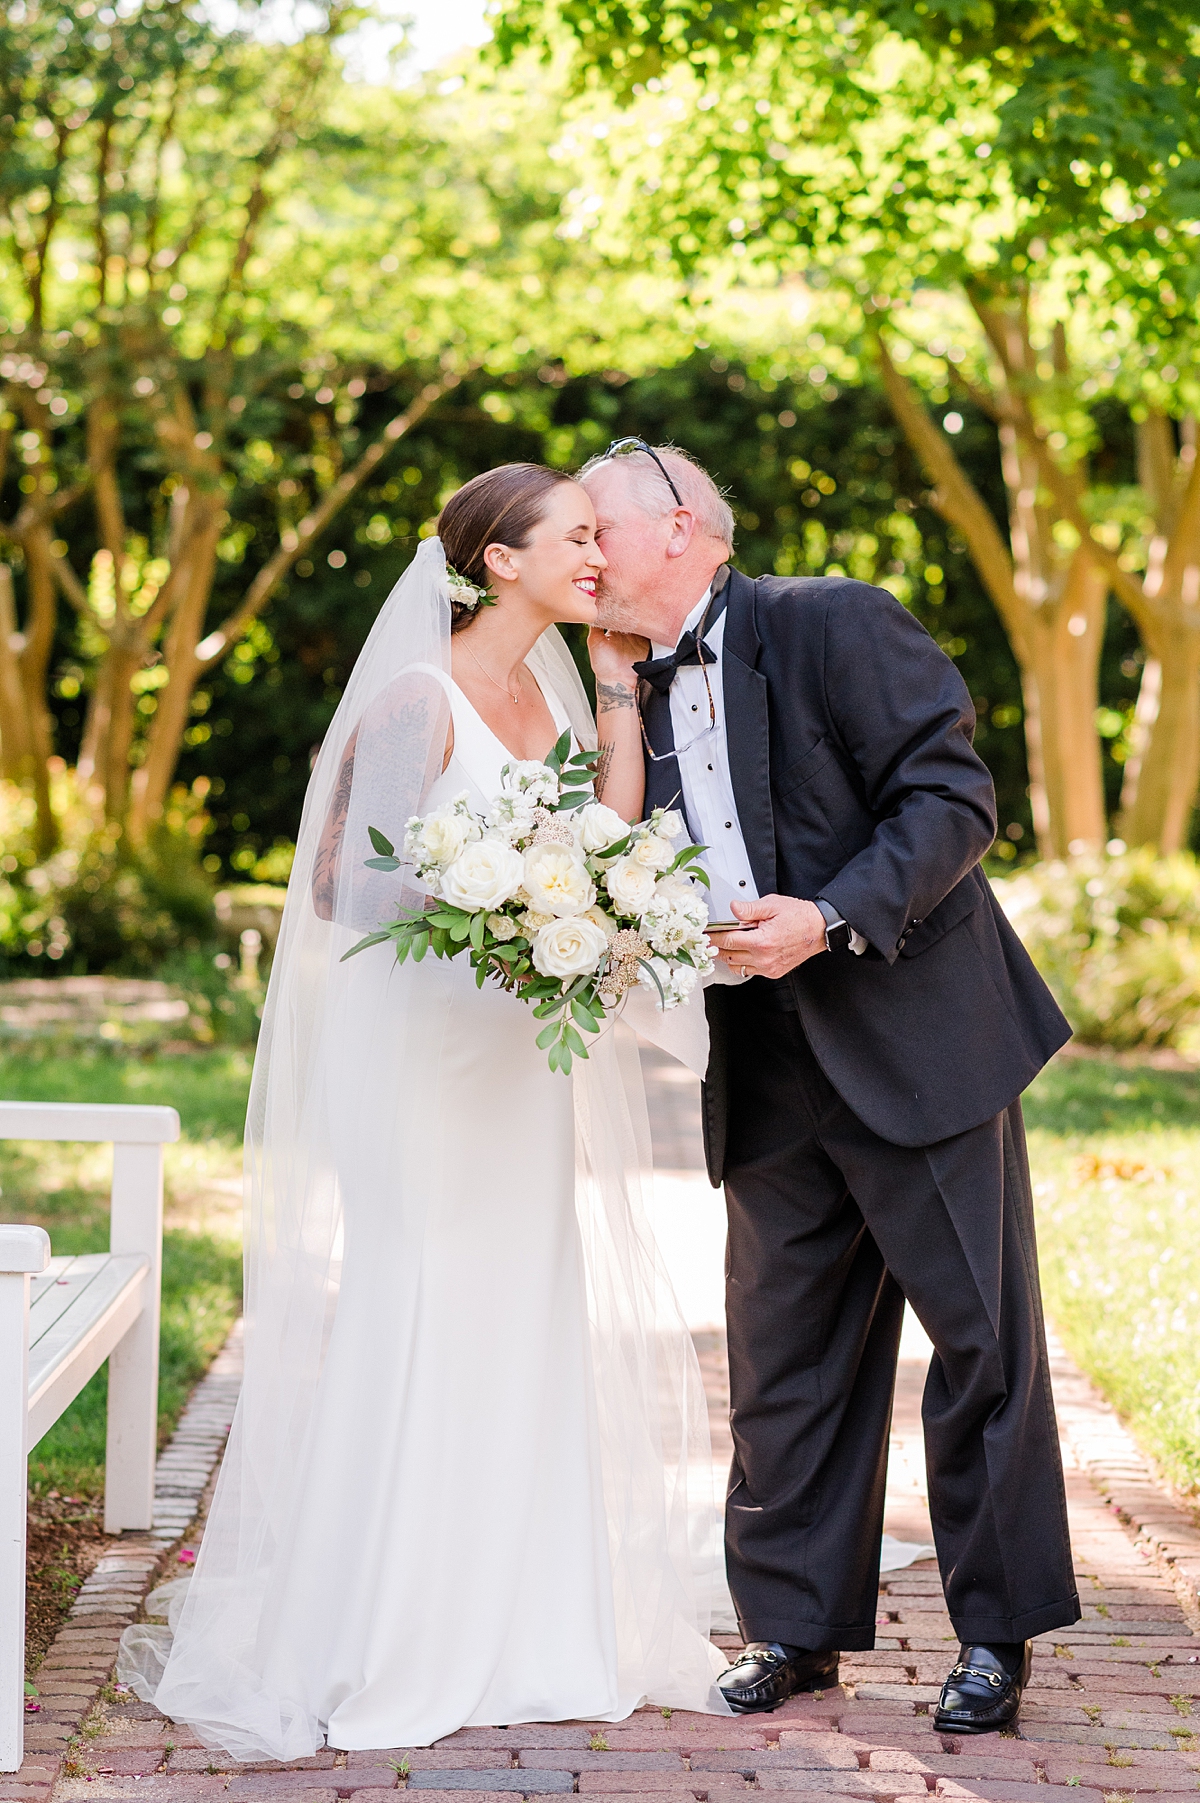 Daddy Daughter First Look Portraits at Spring Lewis Ginter Botanical Garden Wedding. Wedding Photography by Charlottesville Wedding Photographer Kailey Brianne Photography. 